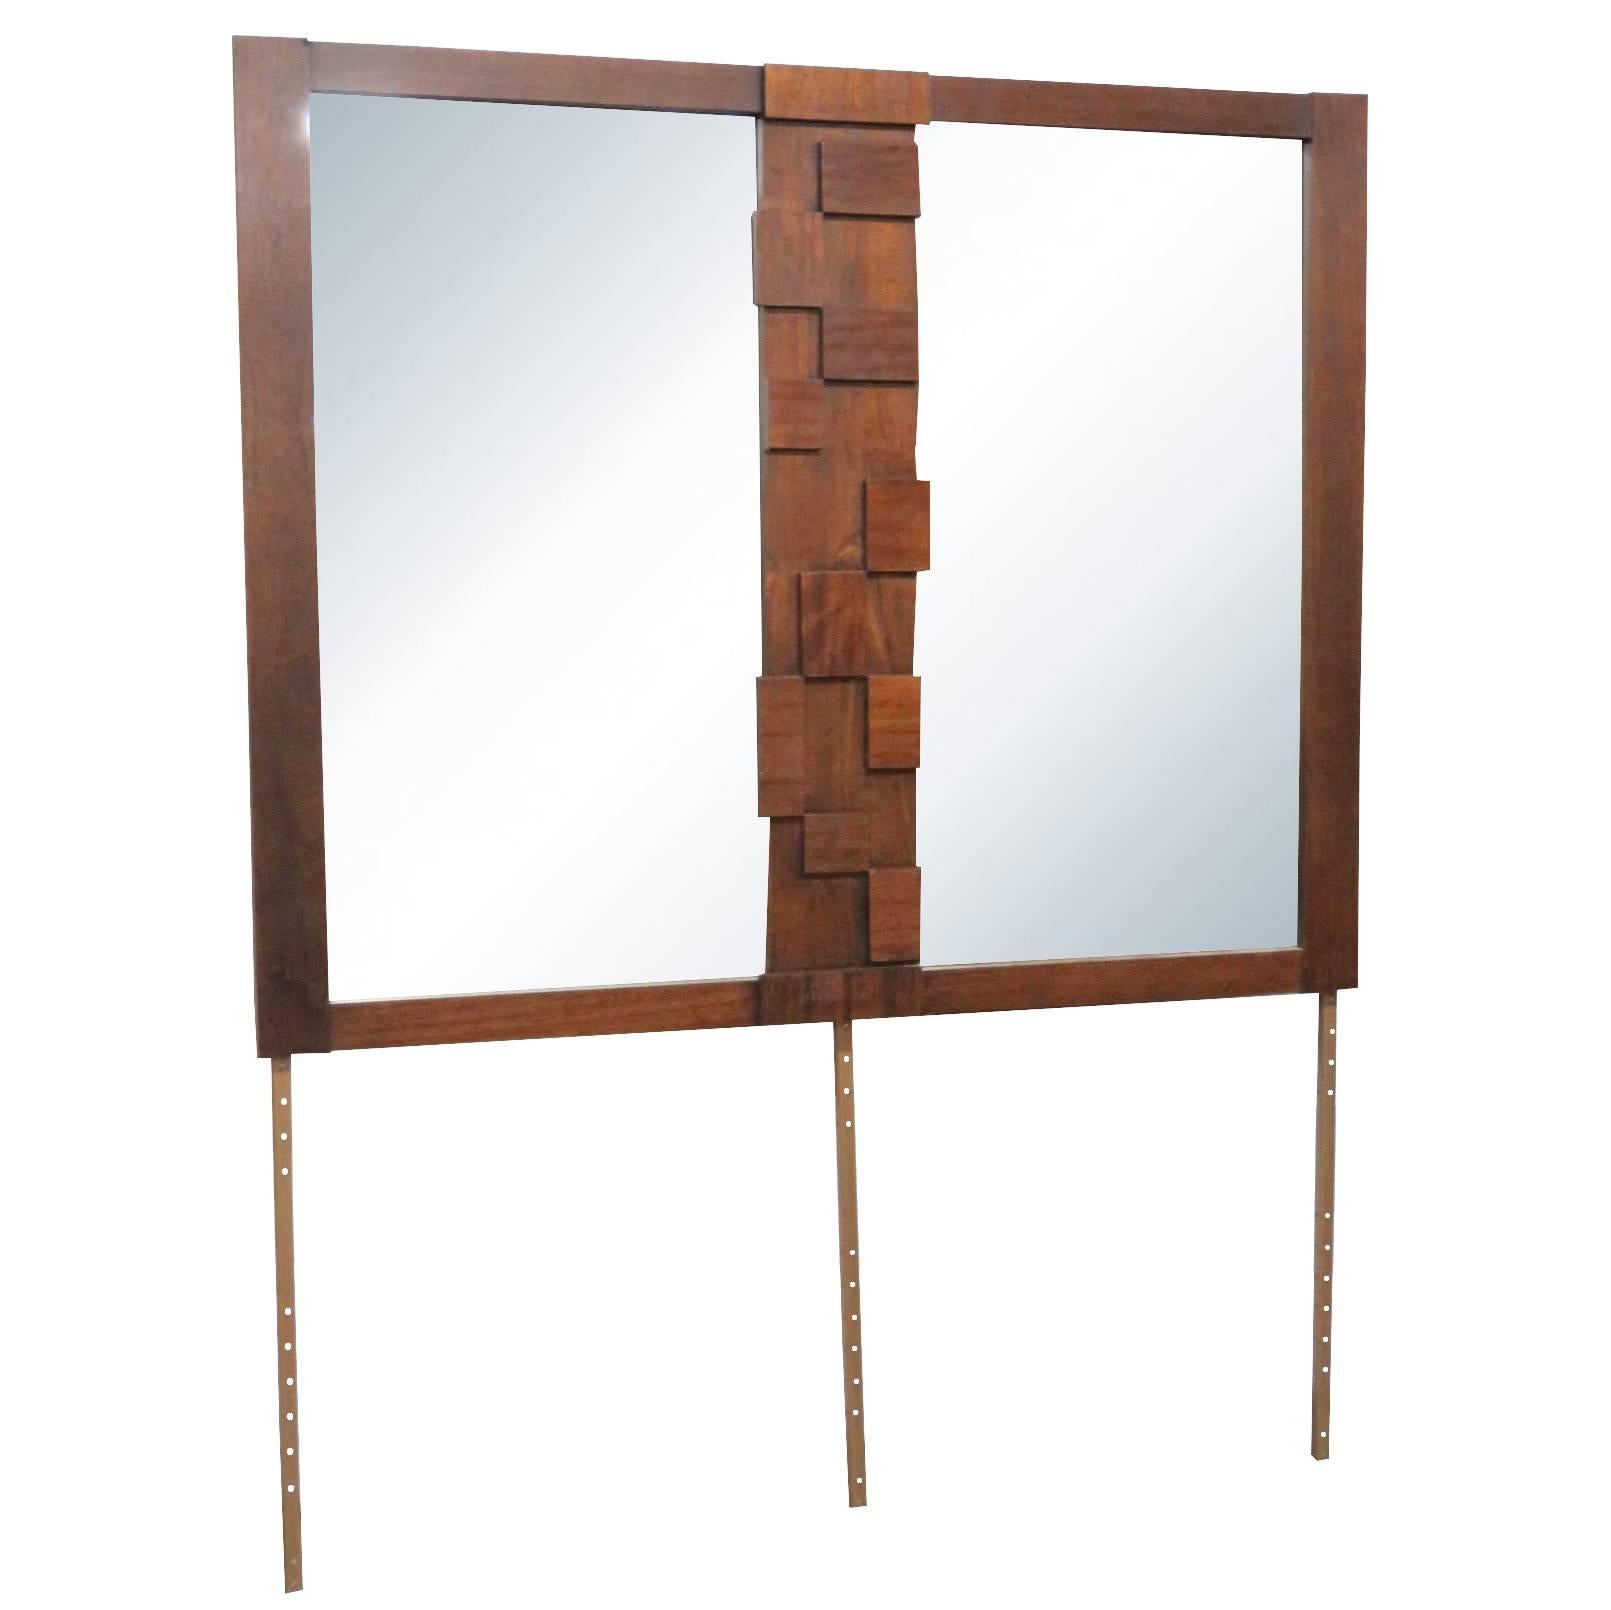 Mirror has a Brutalist style with walnut drawers. Manufactured by Lane Furniture Co from the 